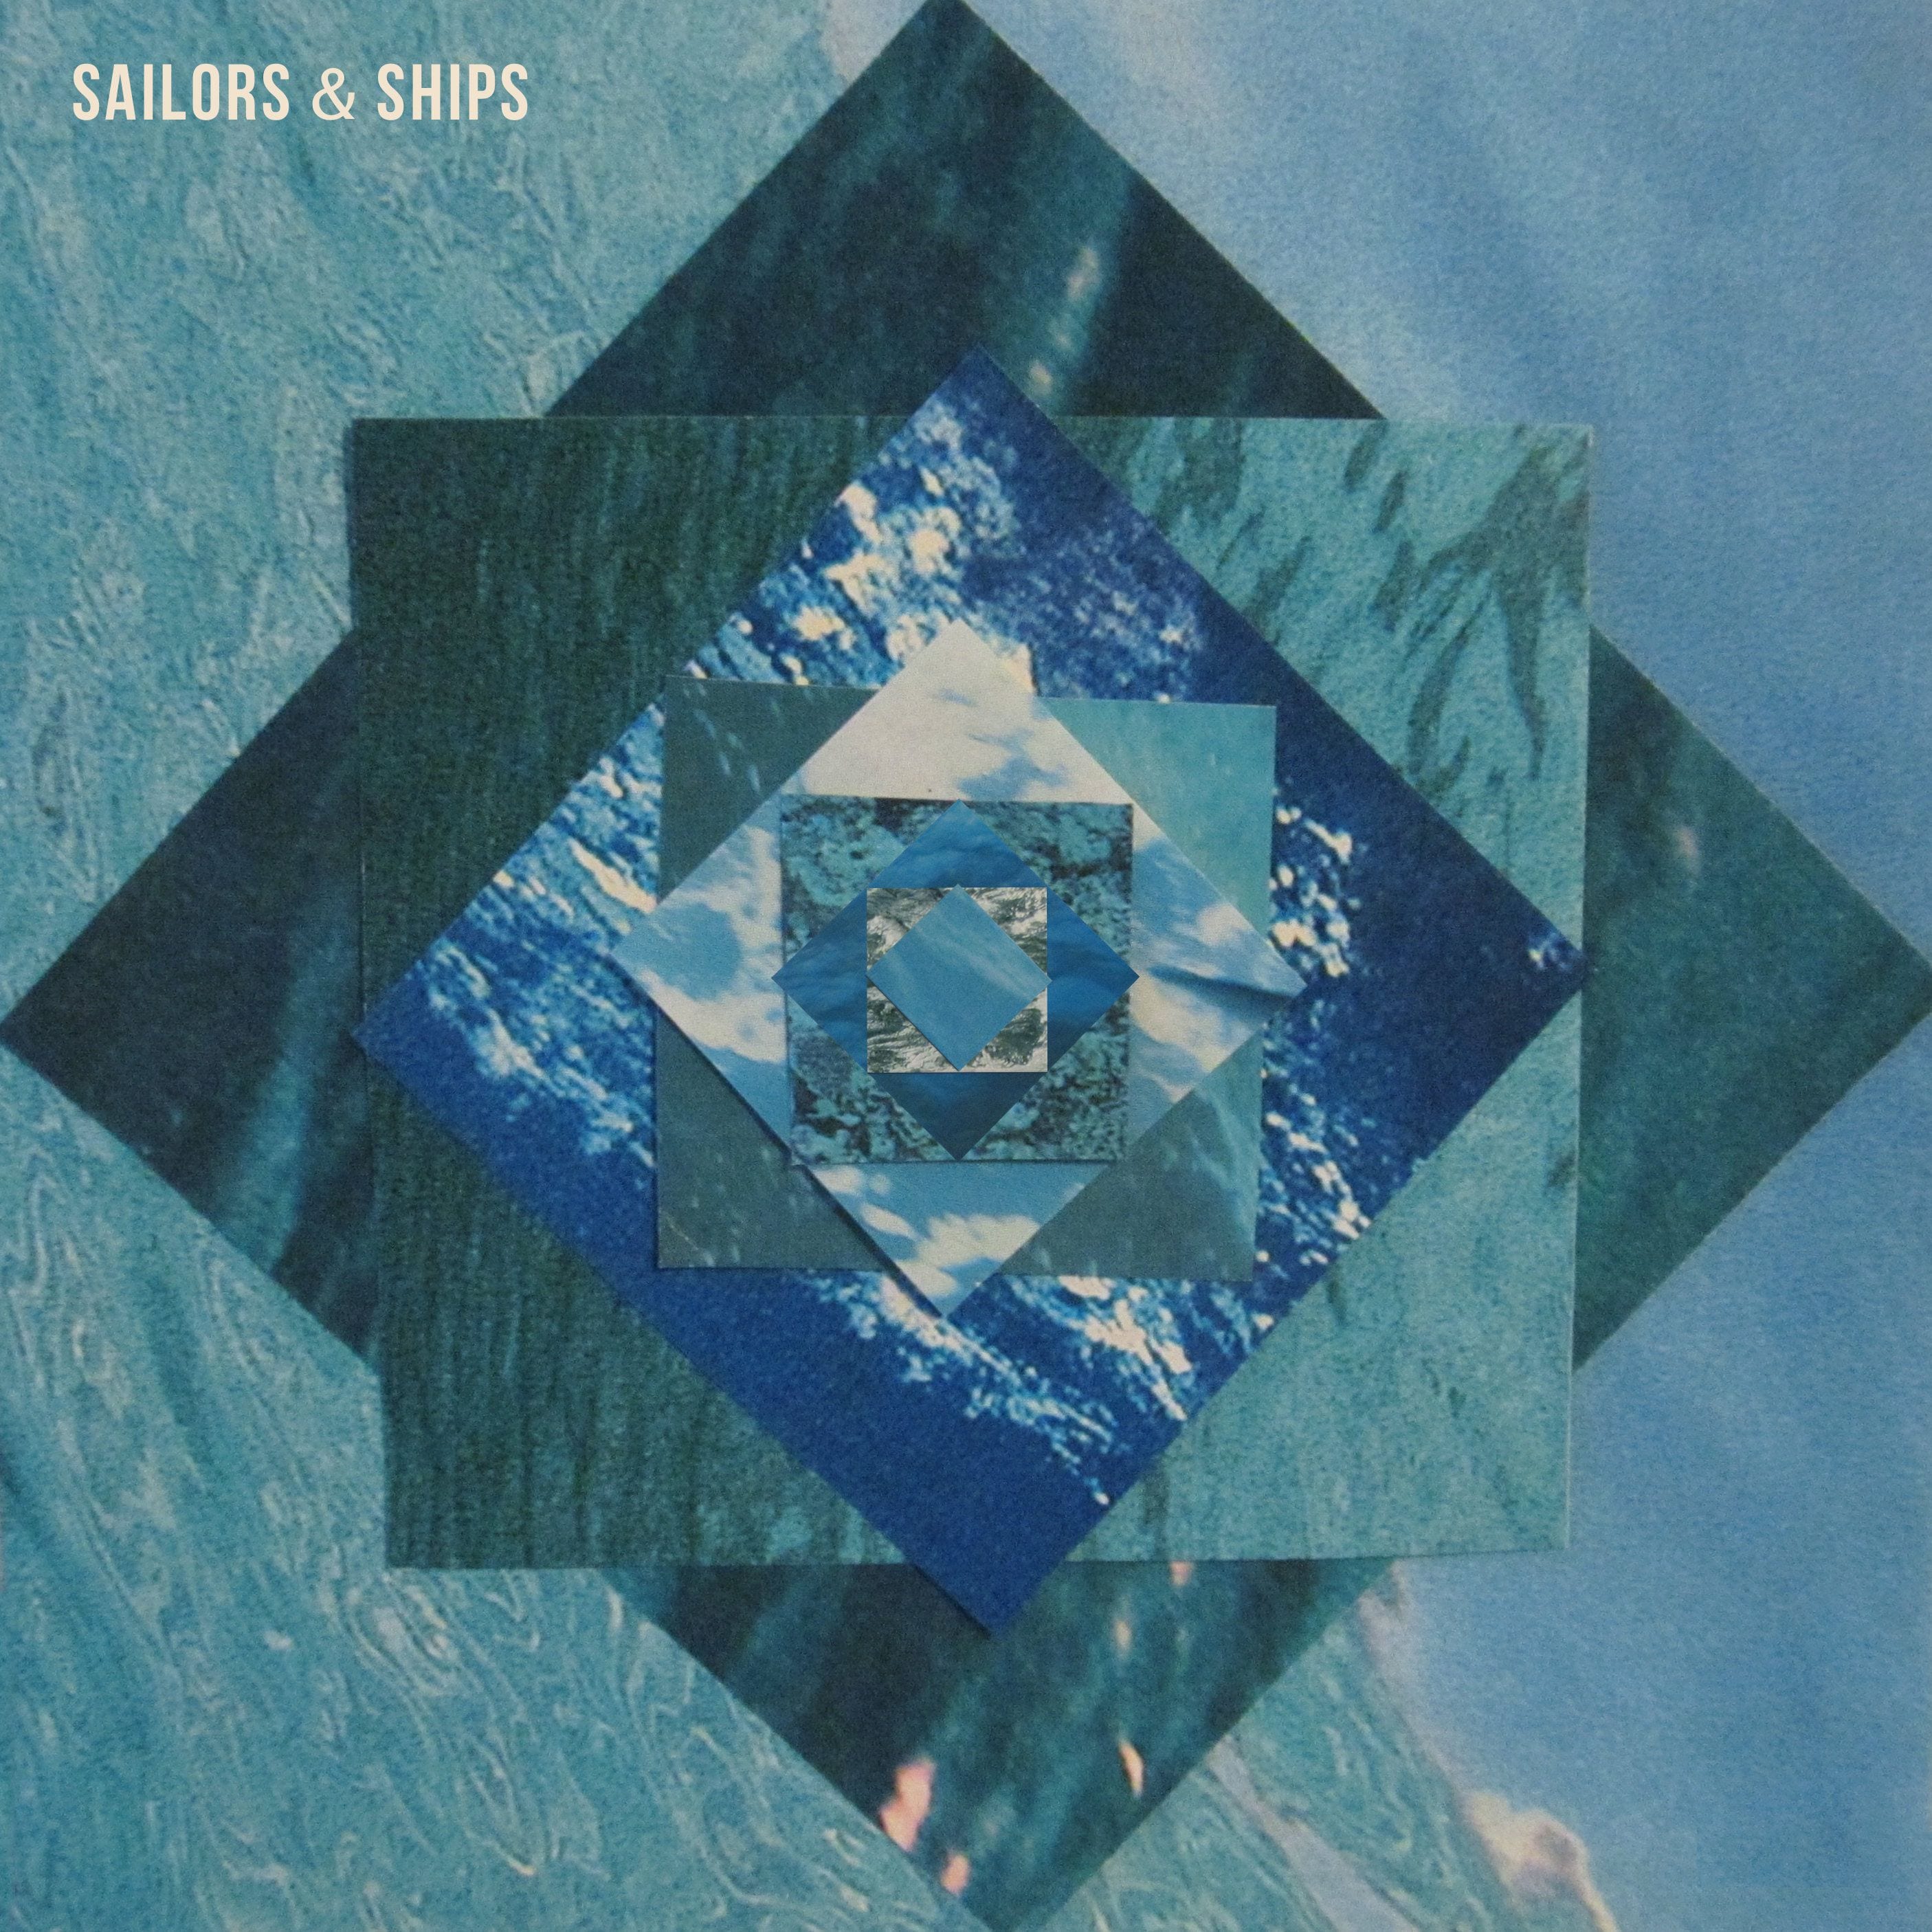 Sailors & Ships – “Cave In” (premiere)